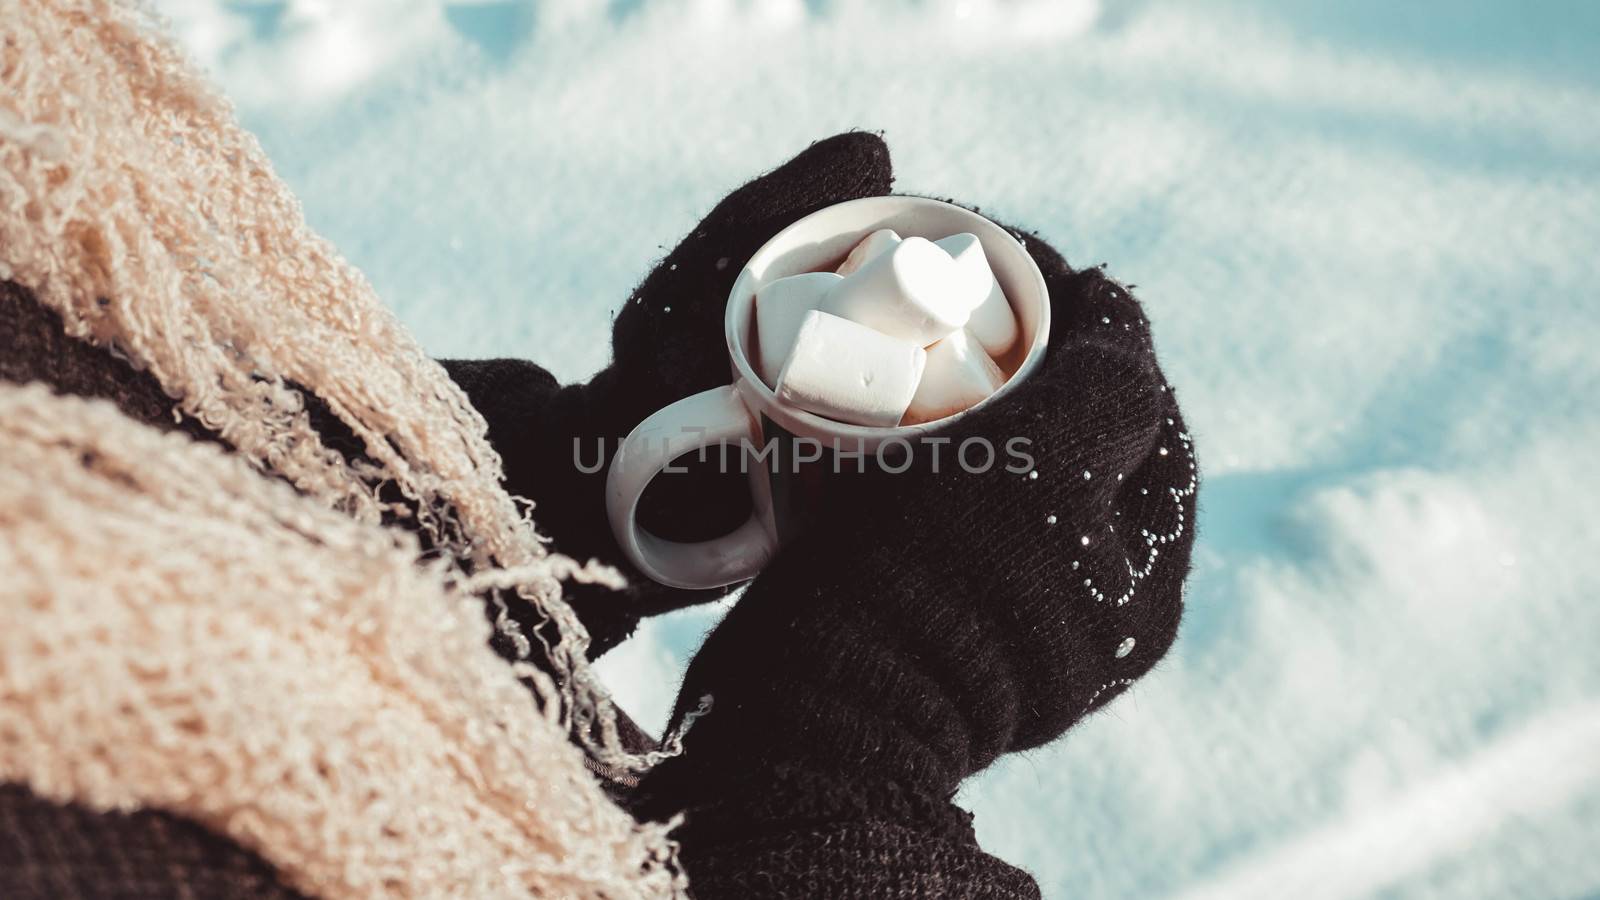 A cup of cocoa with marshmallows in hands in mittens. Warm winter background. Warming drink.